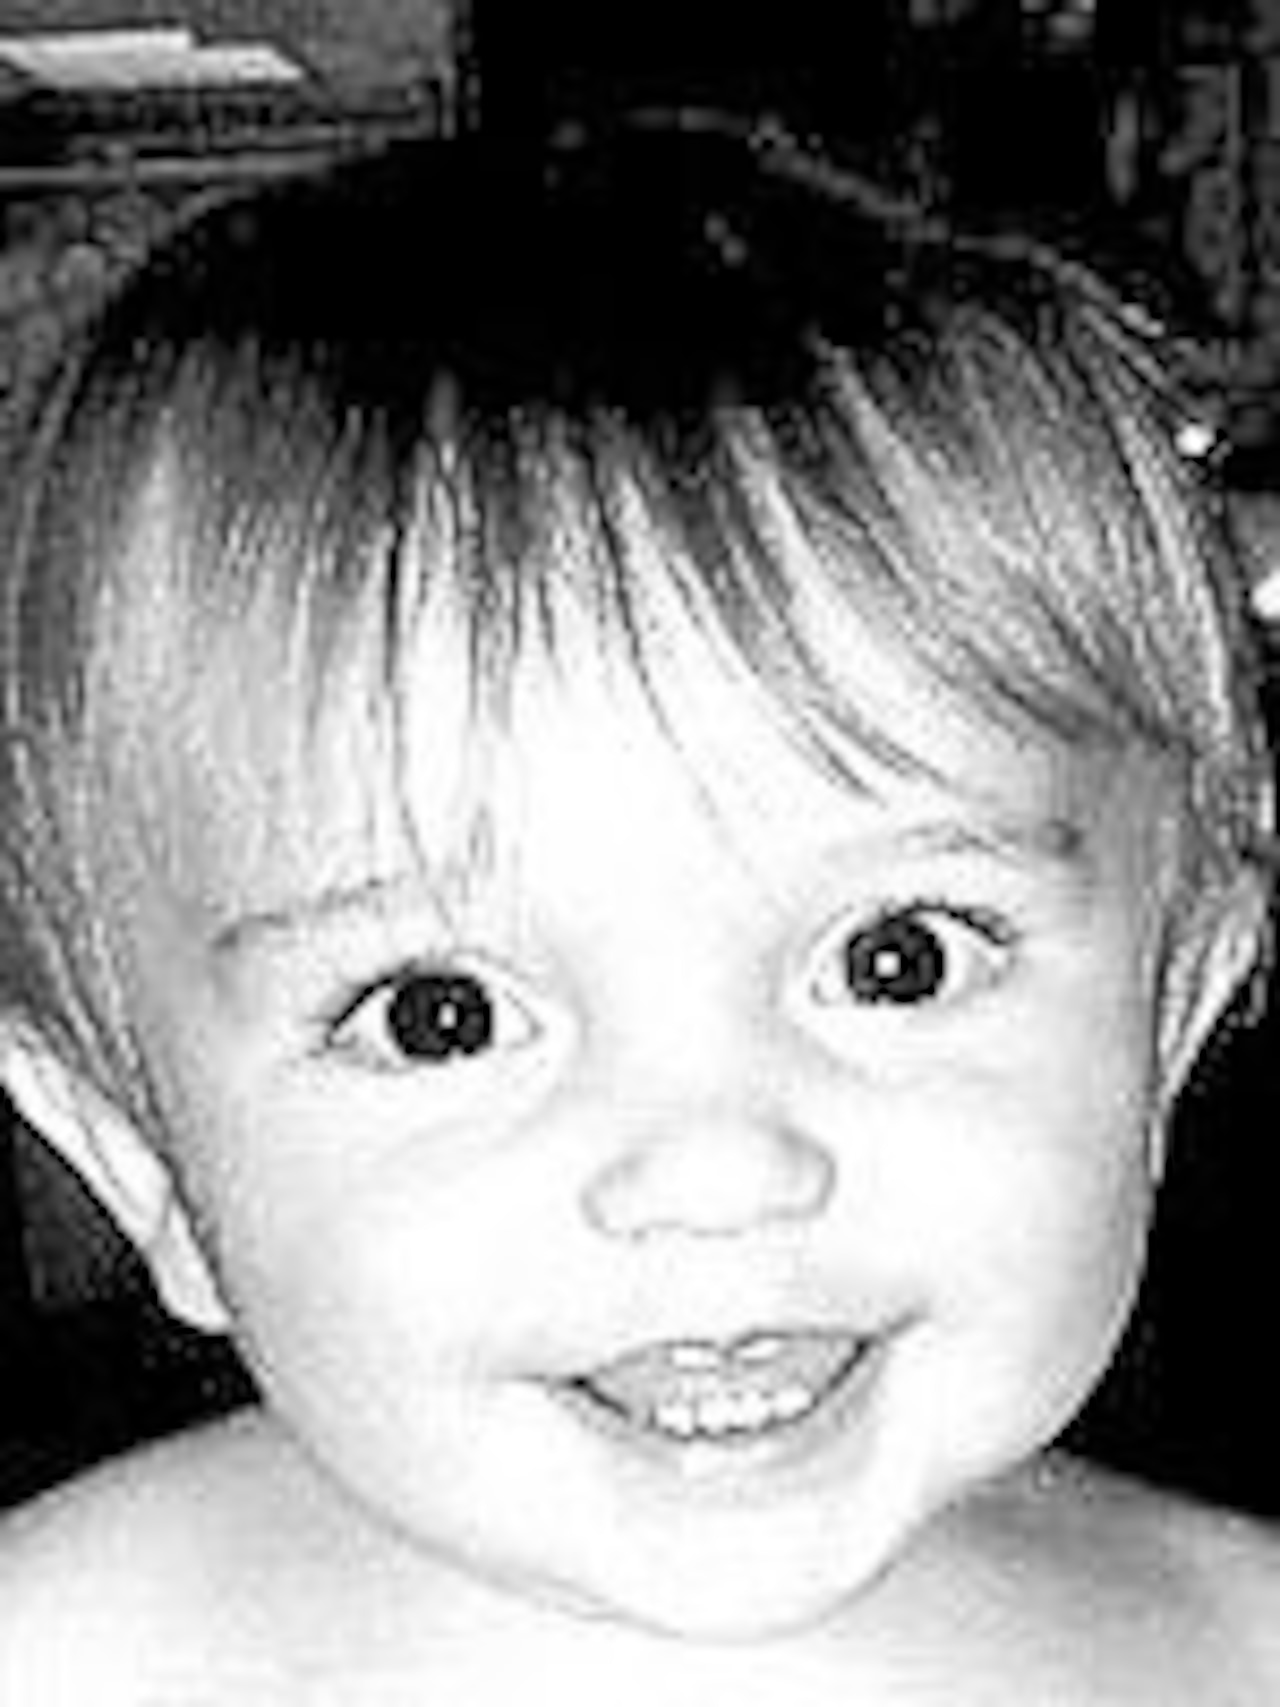 Today’s obituaries: Cameron Leigh Kenan, 22 months; contributions sought for playground fund [Video]